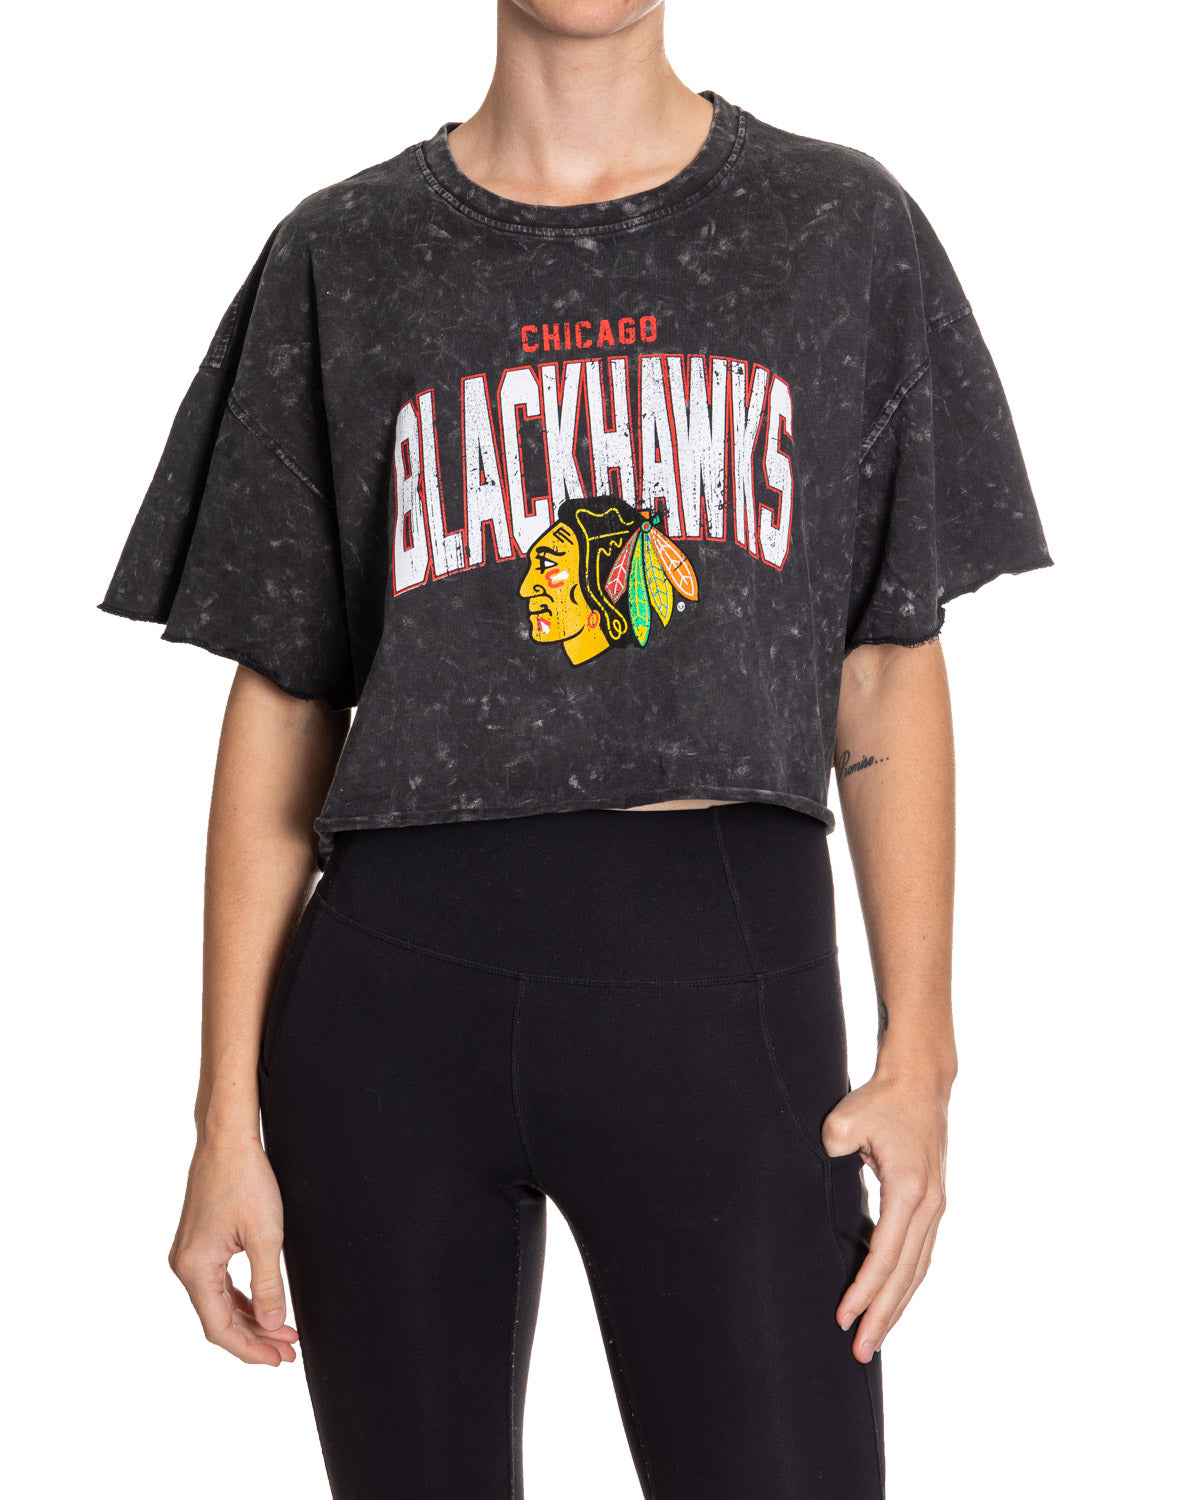 St. Louis Womens Red Roller Rink Cropped Short Sleeve T Shirt